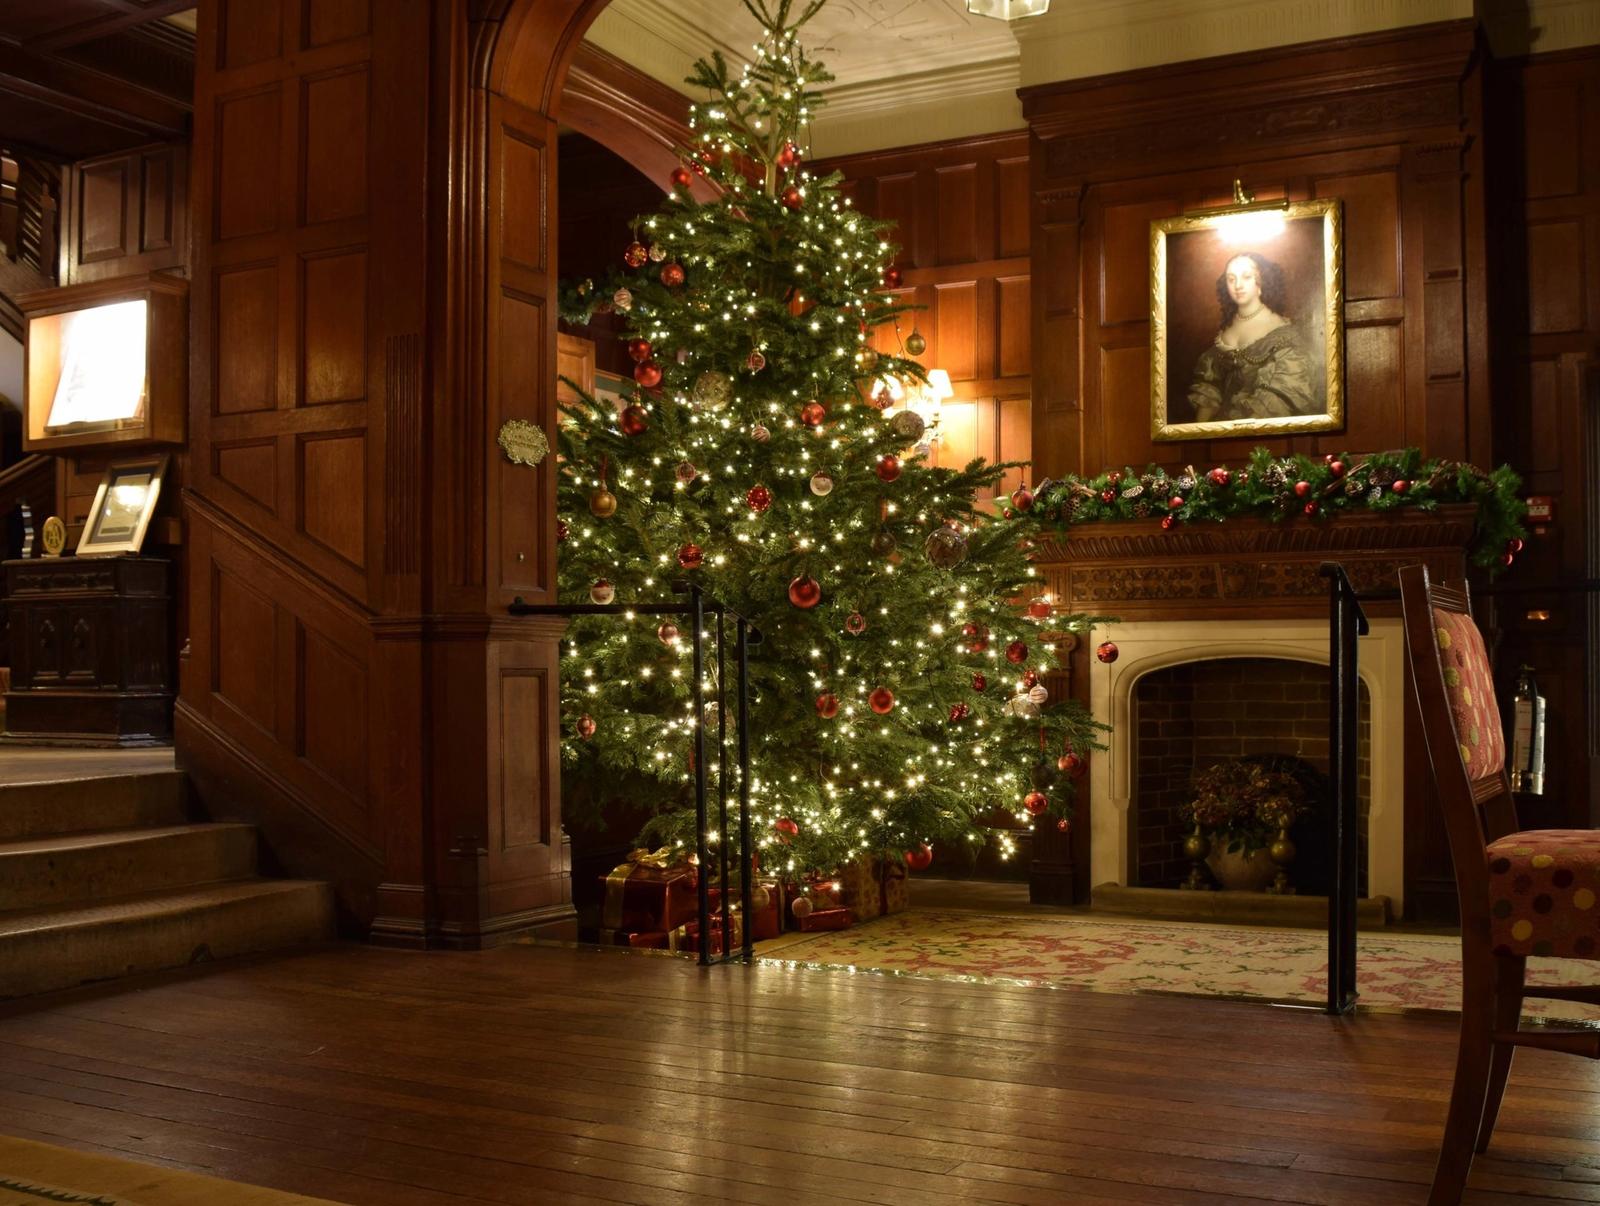 Hotels for Christmas in England